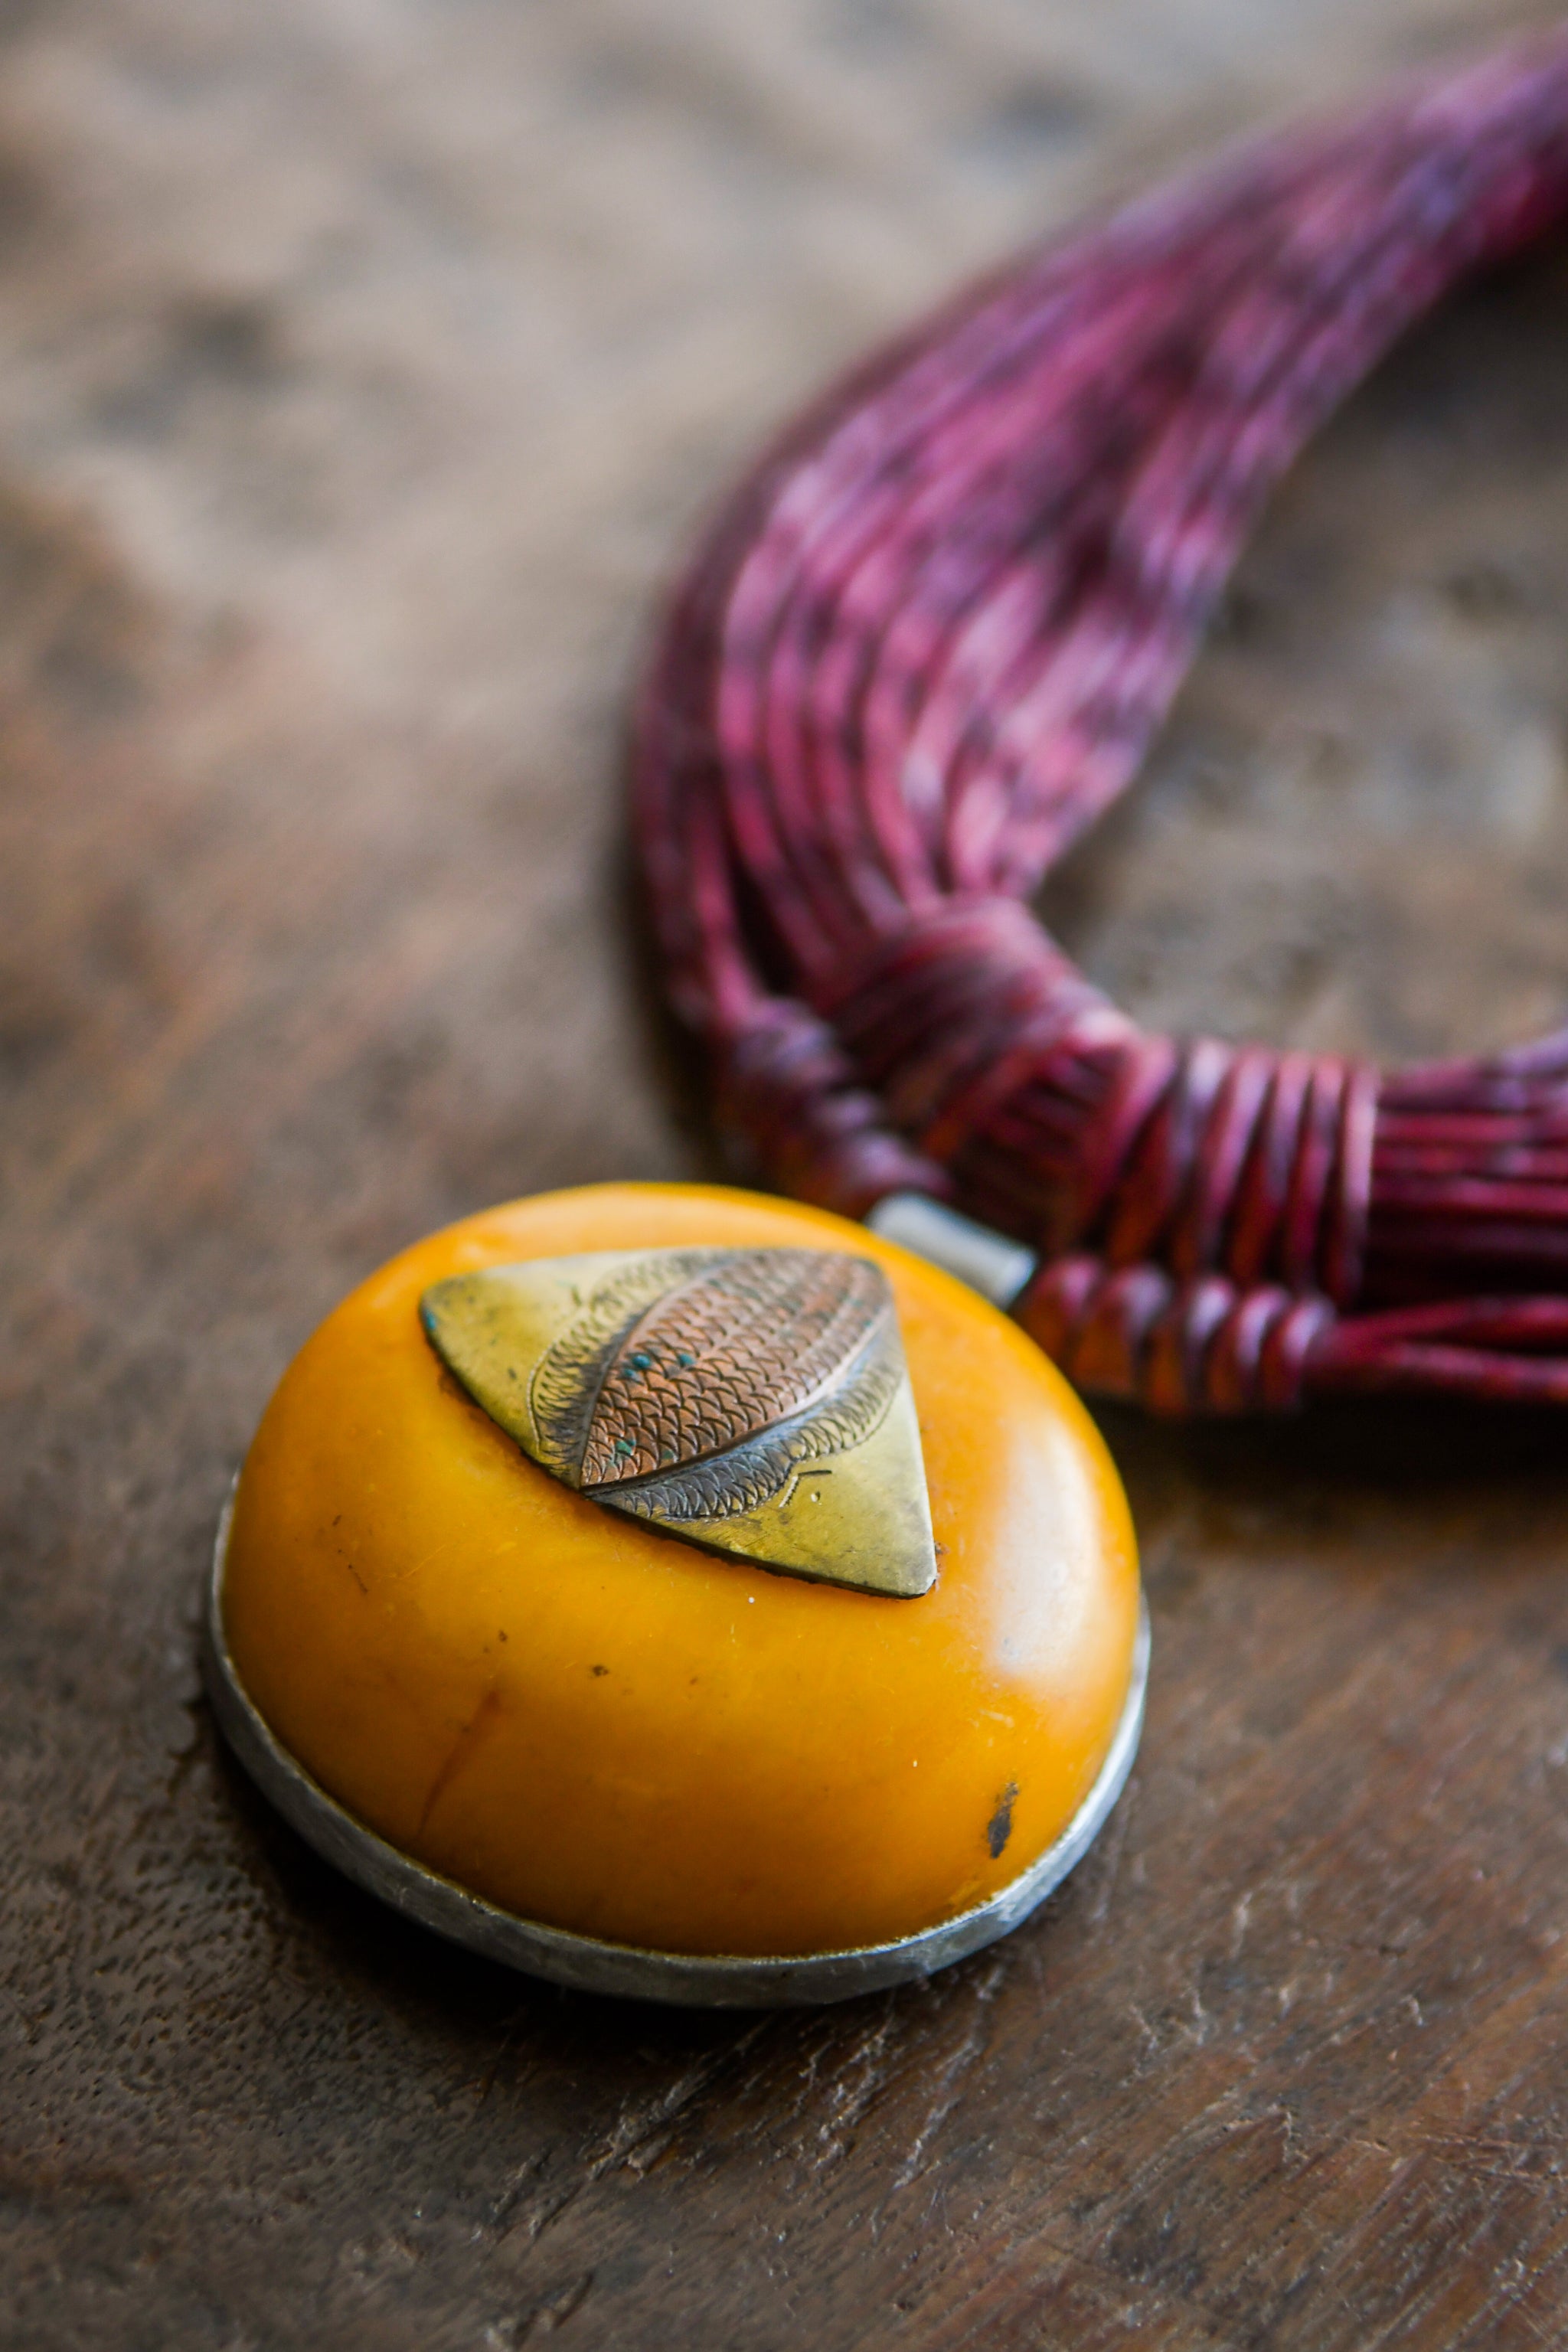 Tribal Necklaces - African Plural Art - African Art - Necklaces - Jewelry - African Tribal Leather Necklace, Amber Pendant